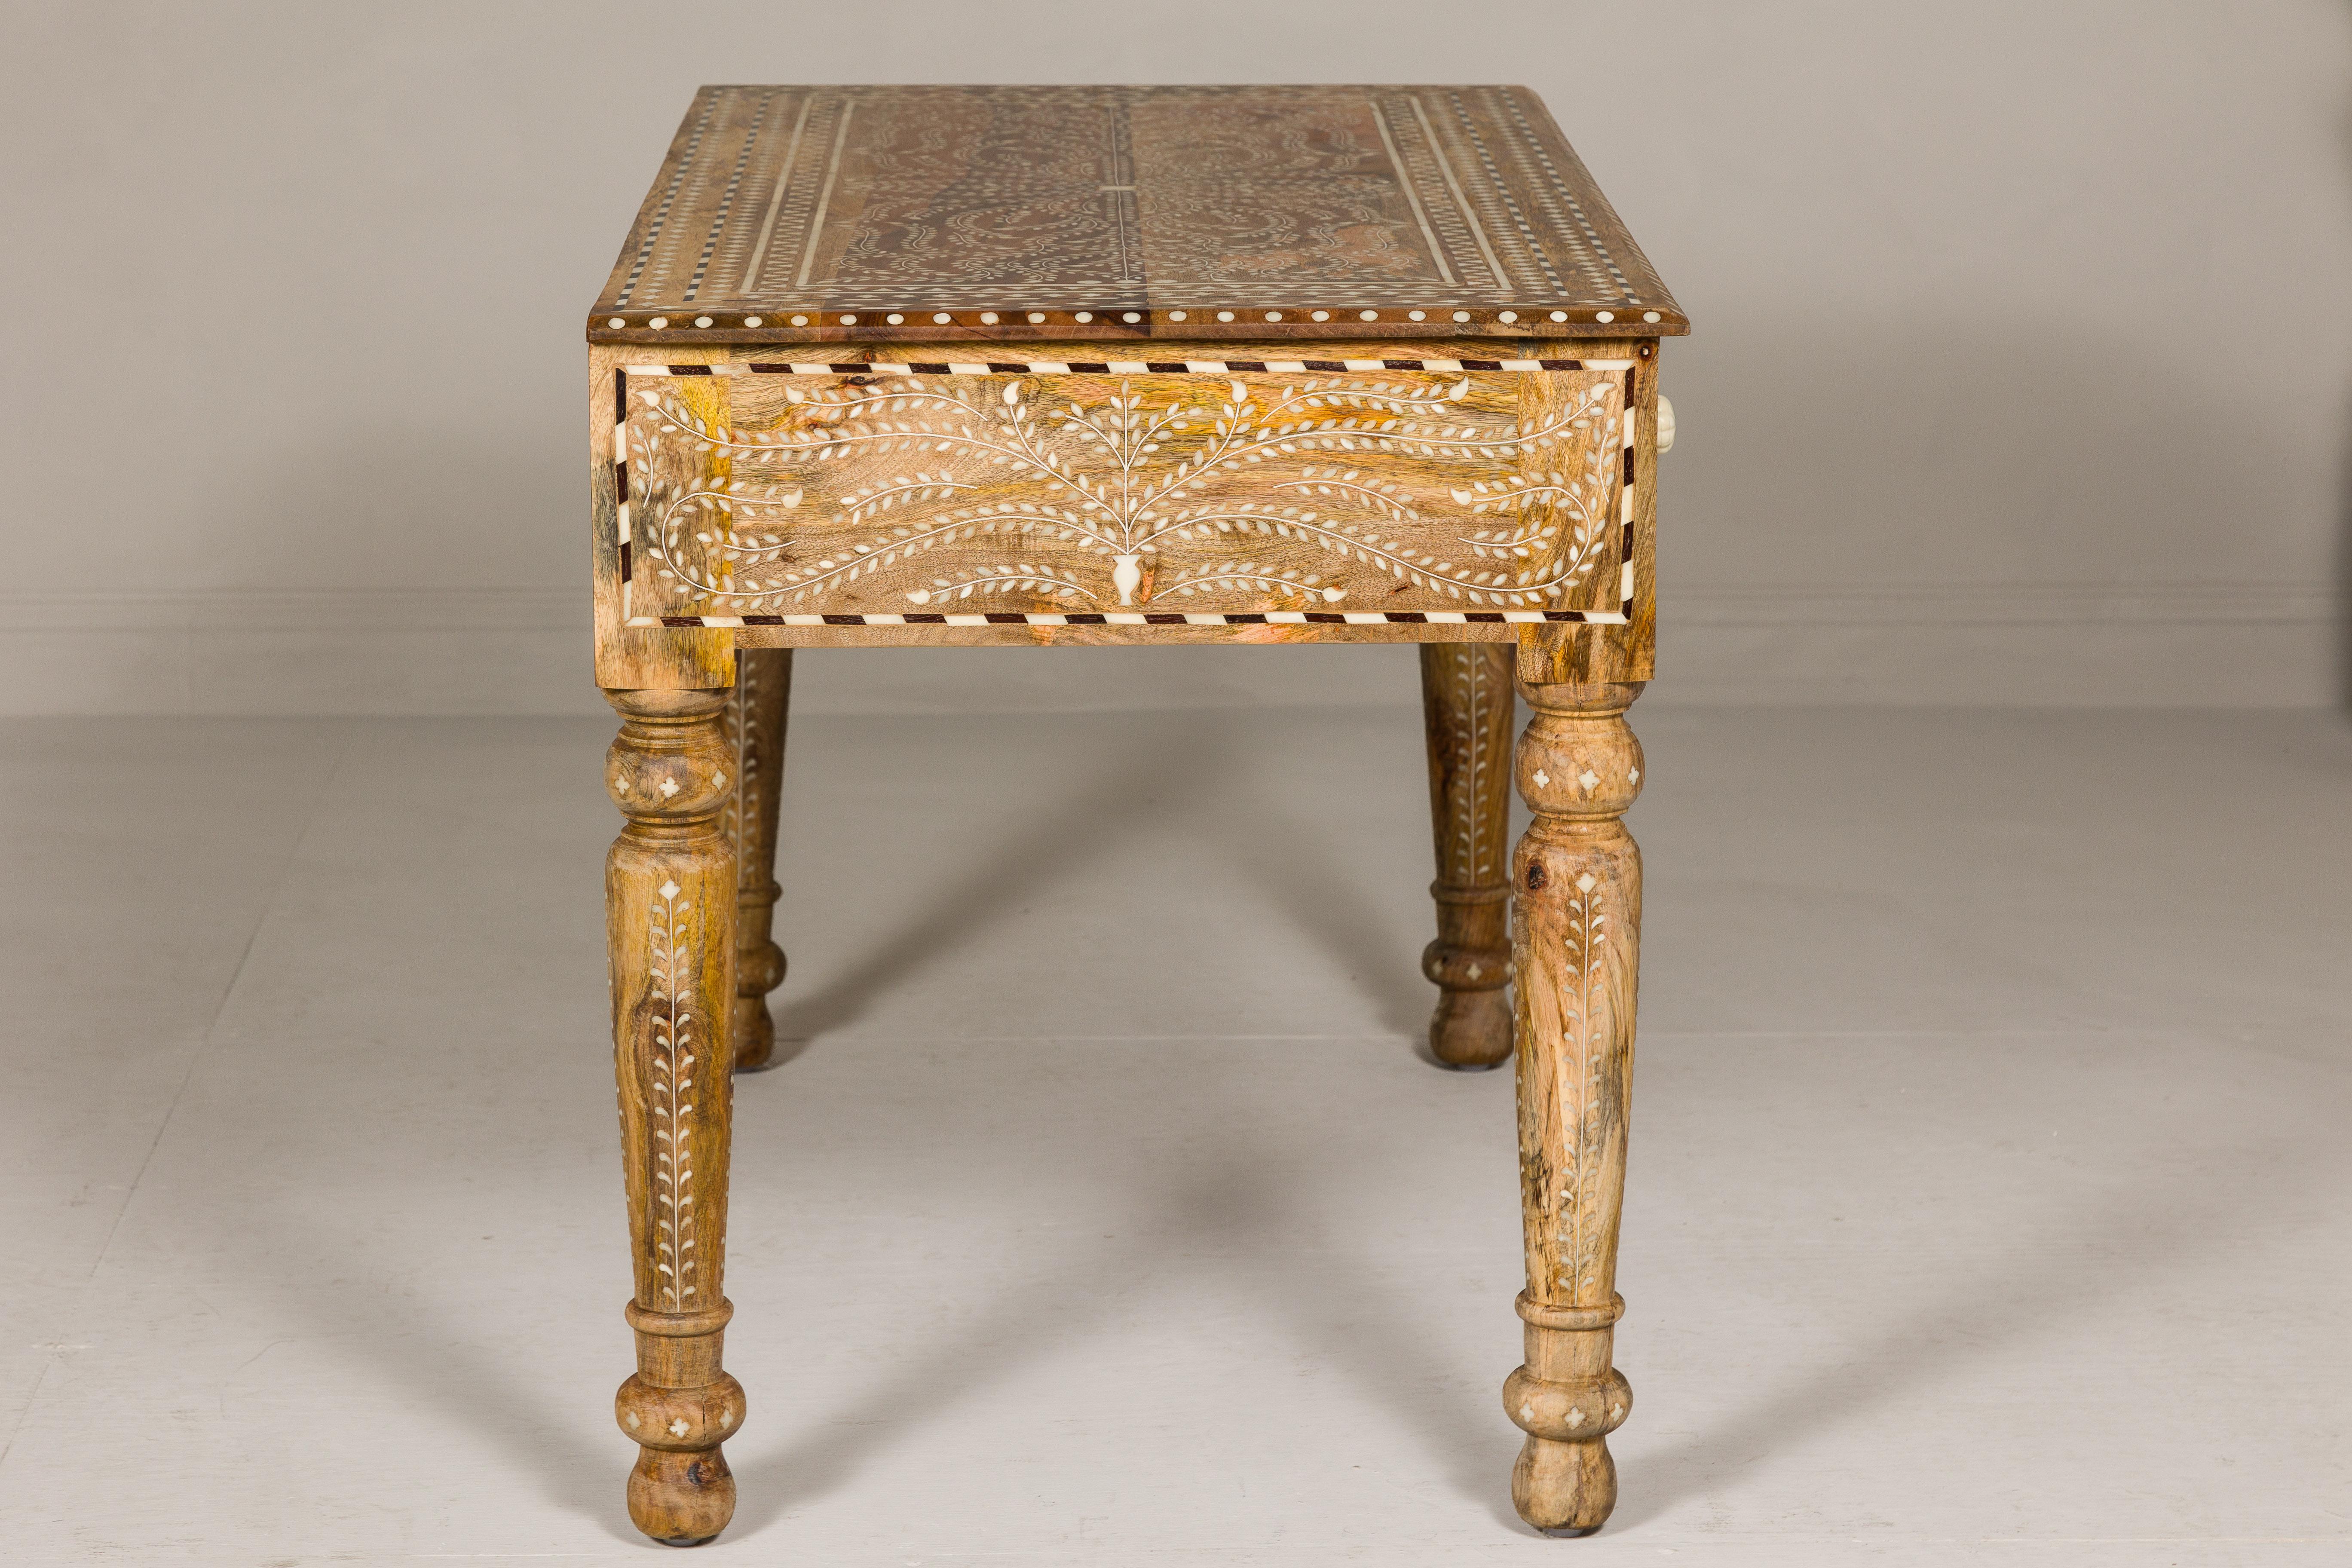 Anglo Indian Style Mango Wood Desk with Drawers, Bone Inlay and Light Patina For Sale 5